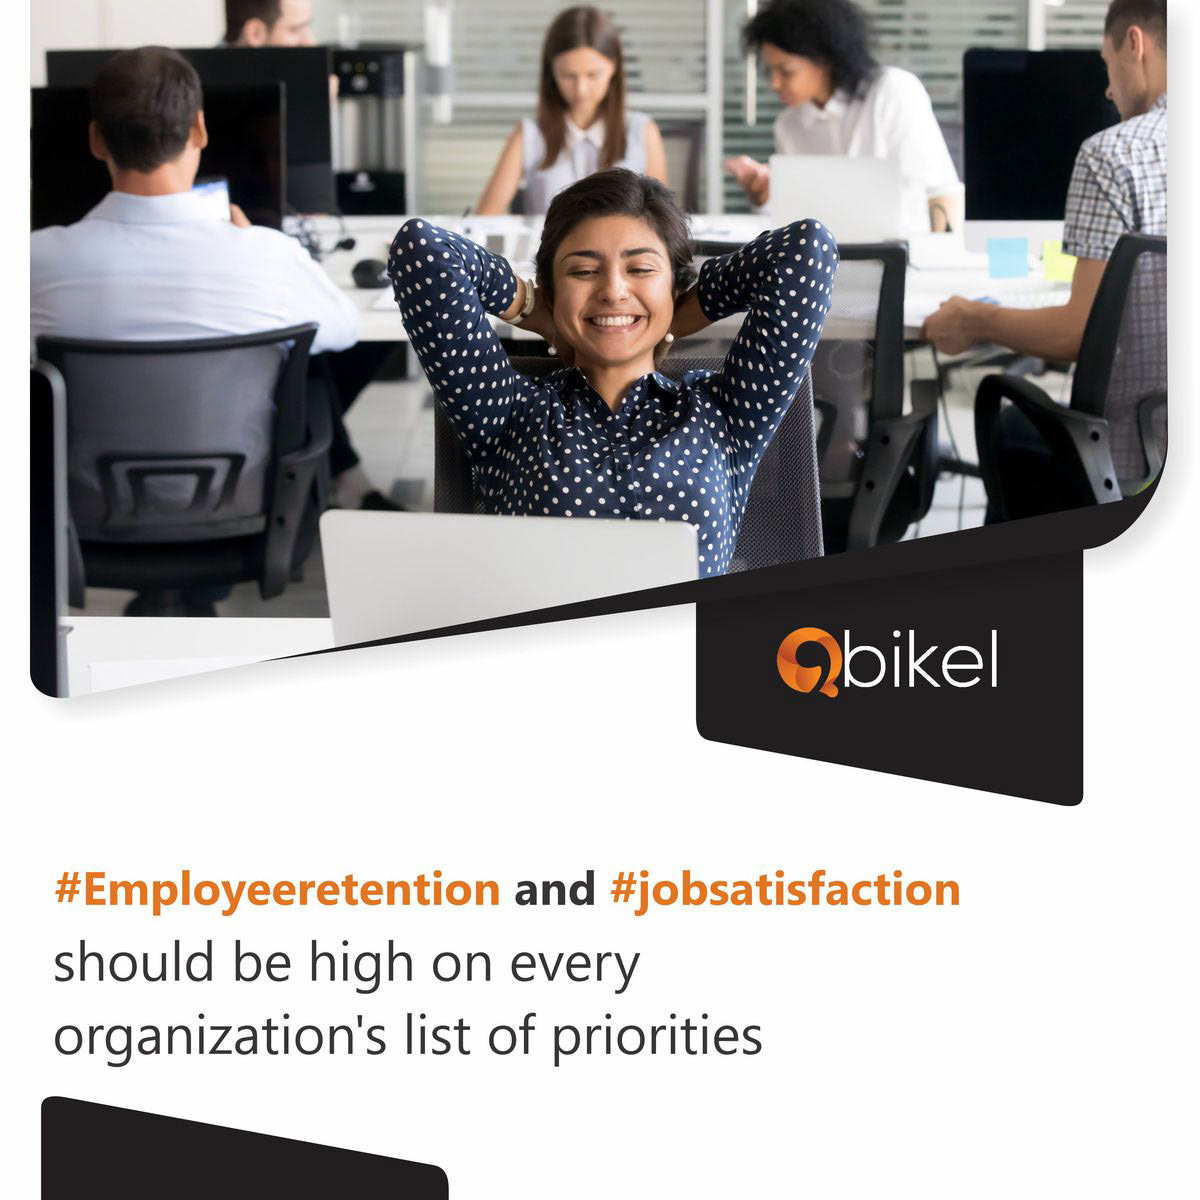 #Employeeretention and #jobsatisfaction should be high on every organization's list of priorities.